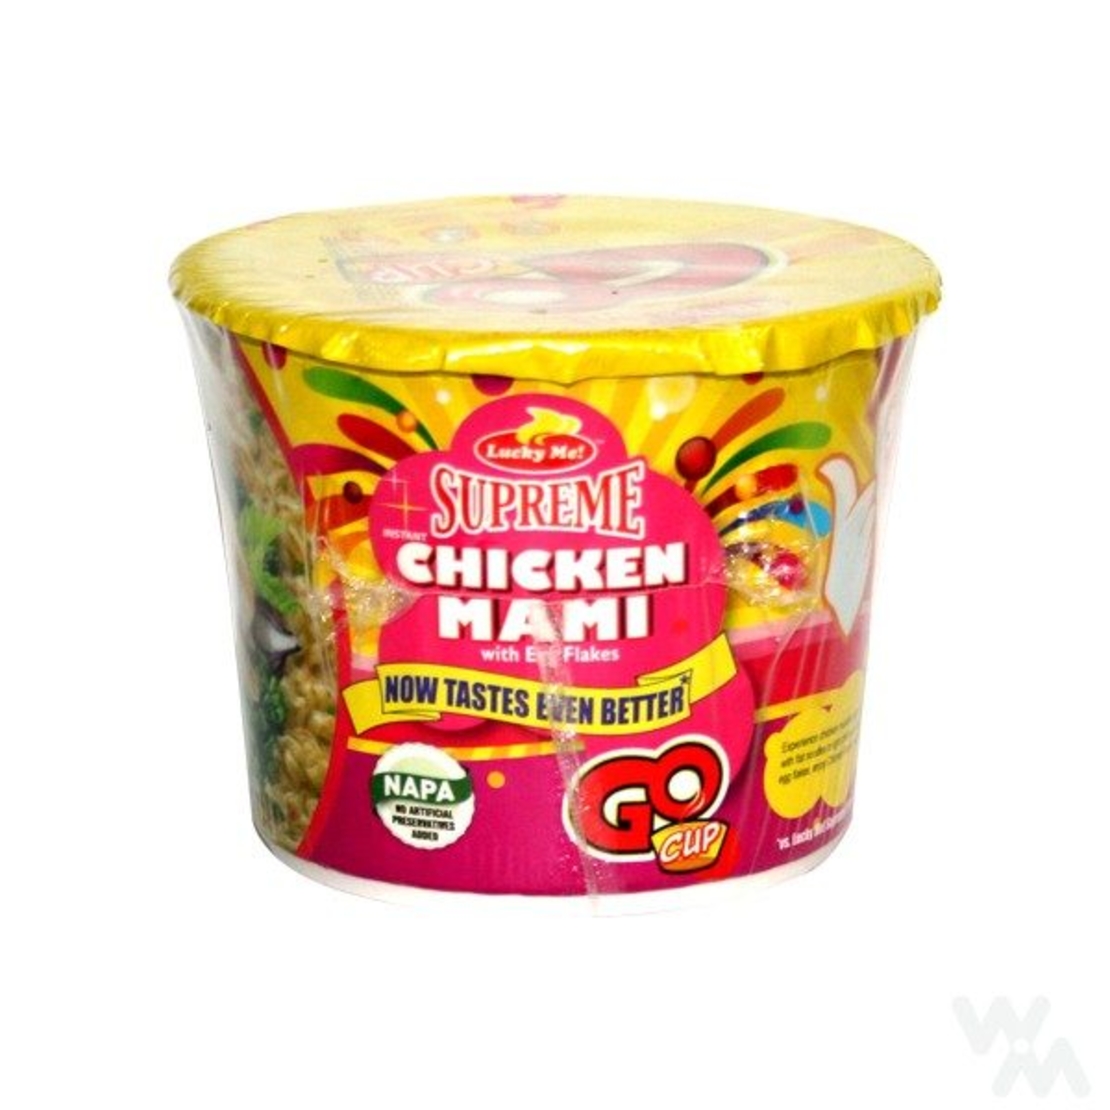 Lucky me - Chicken Mami - instant noodle soup